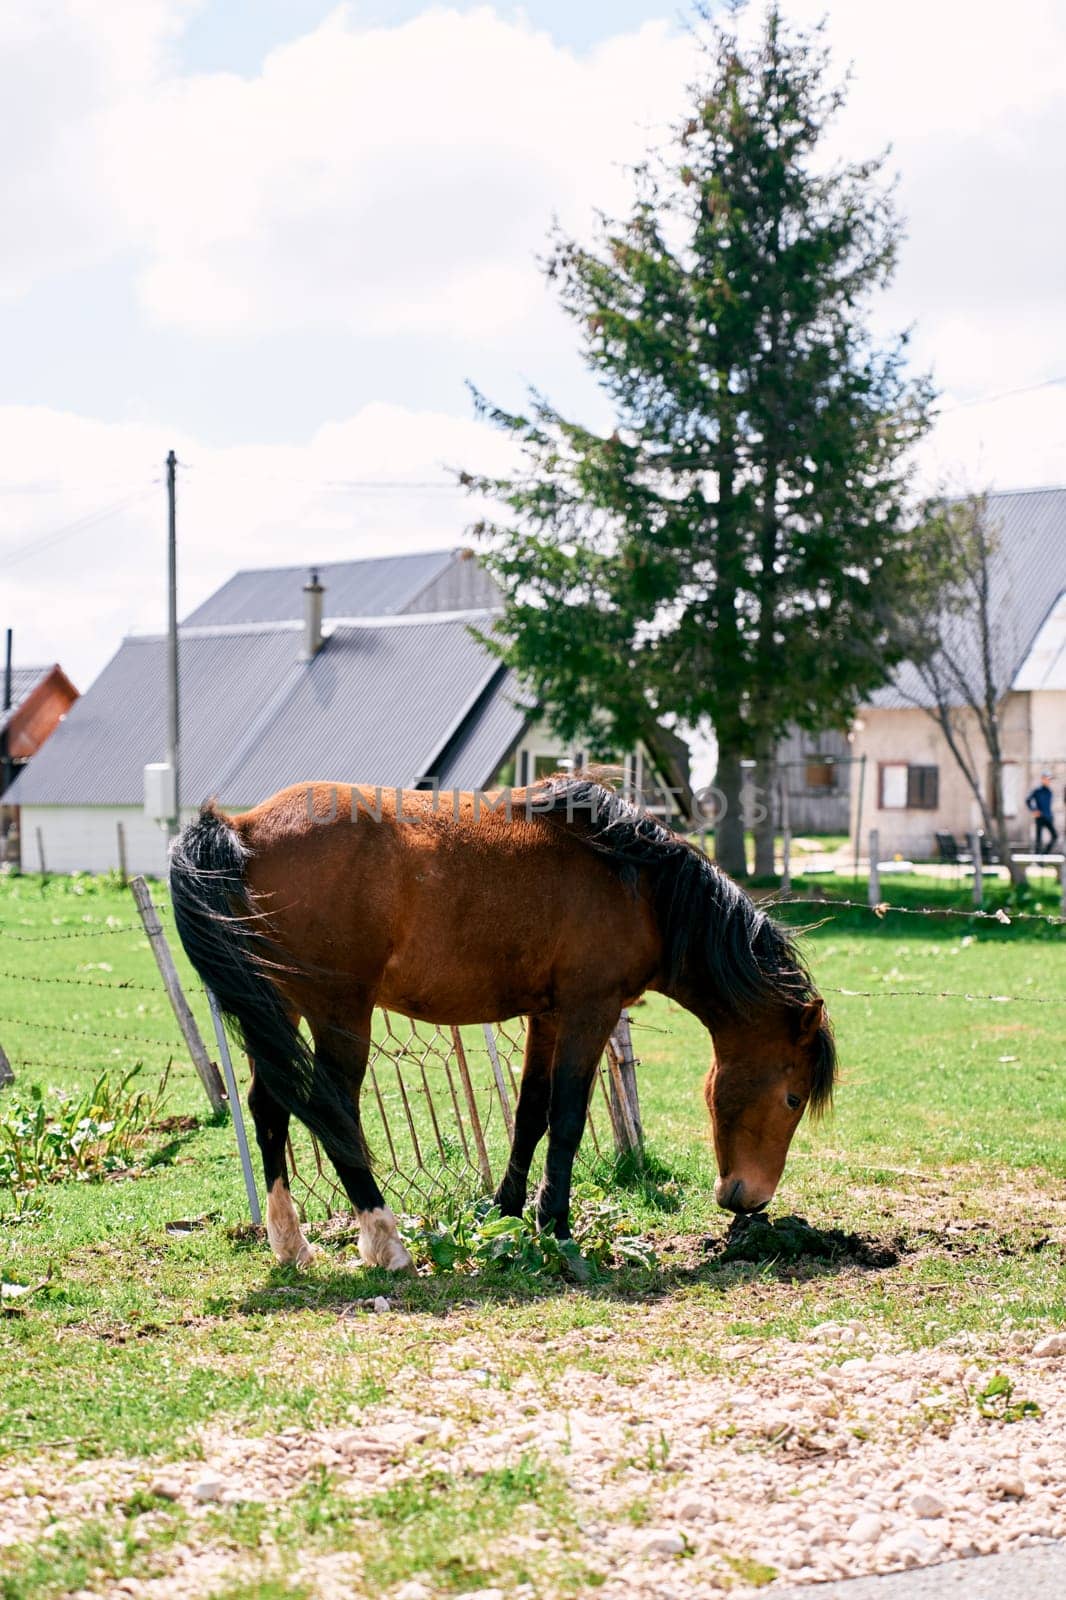 Bay horse graze on a green lawn near a fence in the village. High quality photo